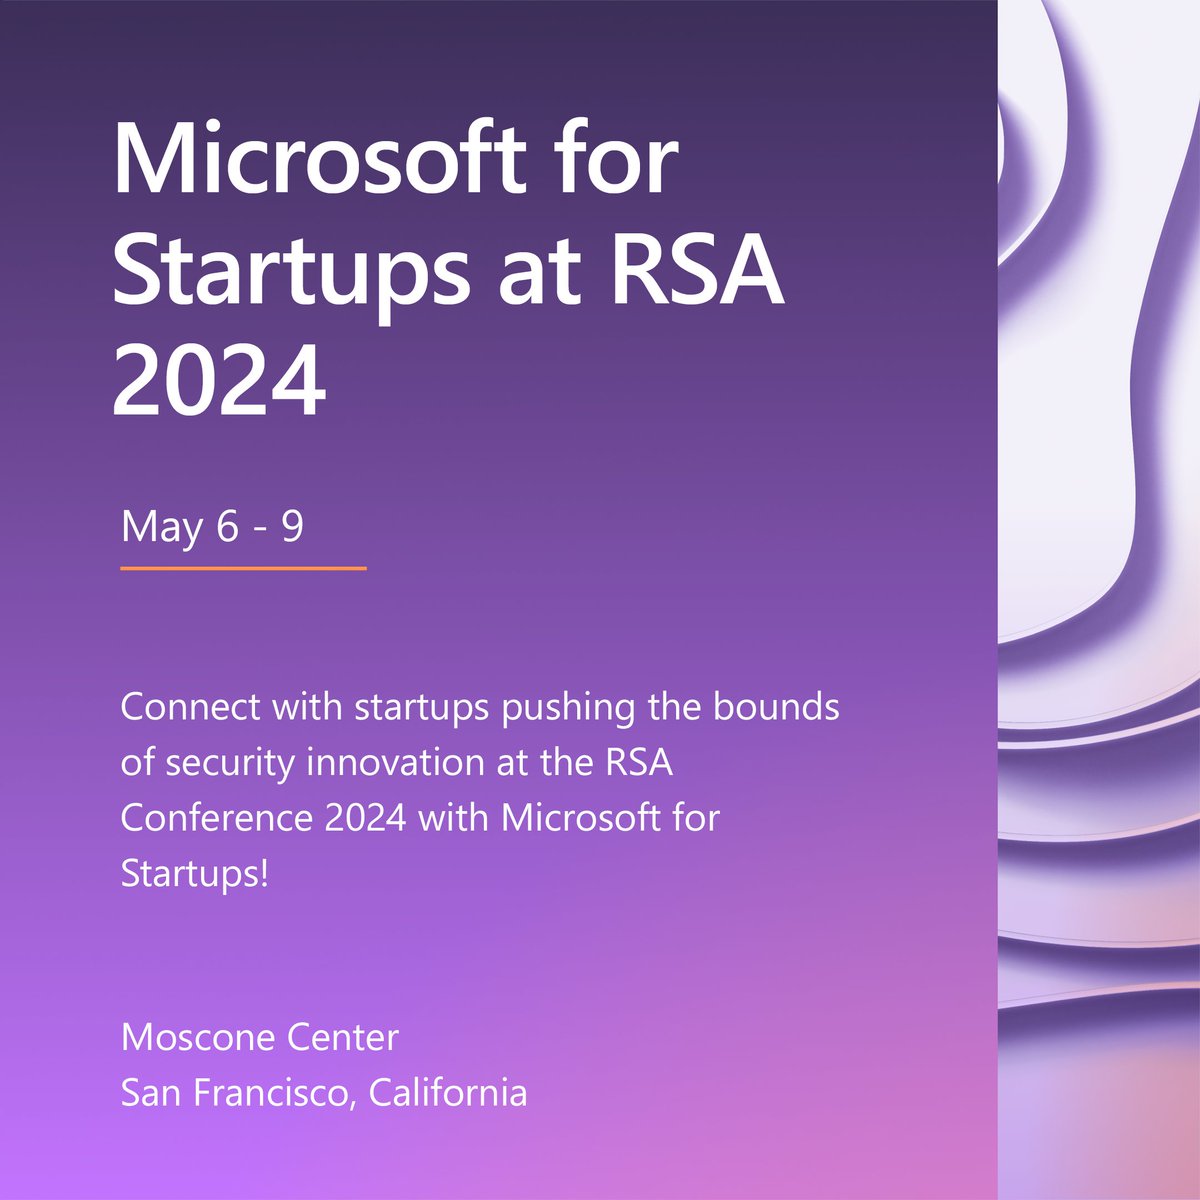 We're excited to unveil our lineup of #Pegasus startups at #RSAConference 2024! Swing by the Microsoft booth #6044N at Moscone Center to meet them in person and don't forget to register for our breakfast or theater sessions on May 7 & 8! Learn more: msft.it/6014YH3YI